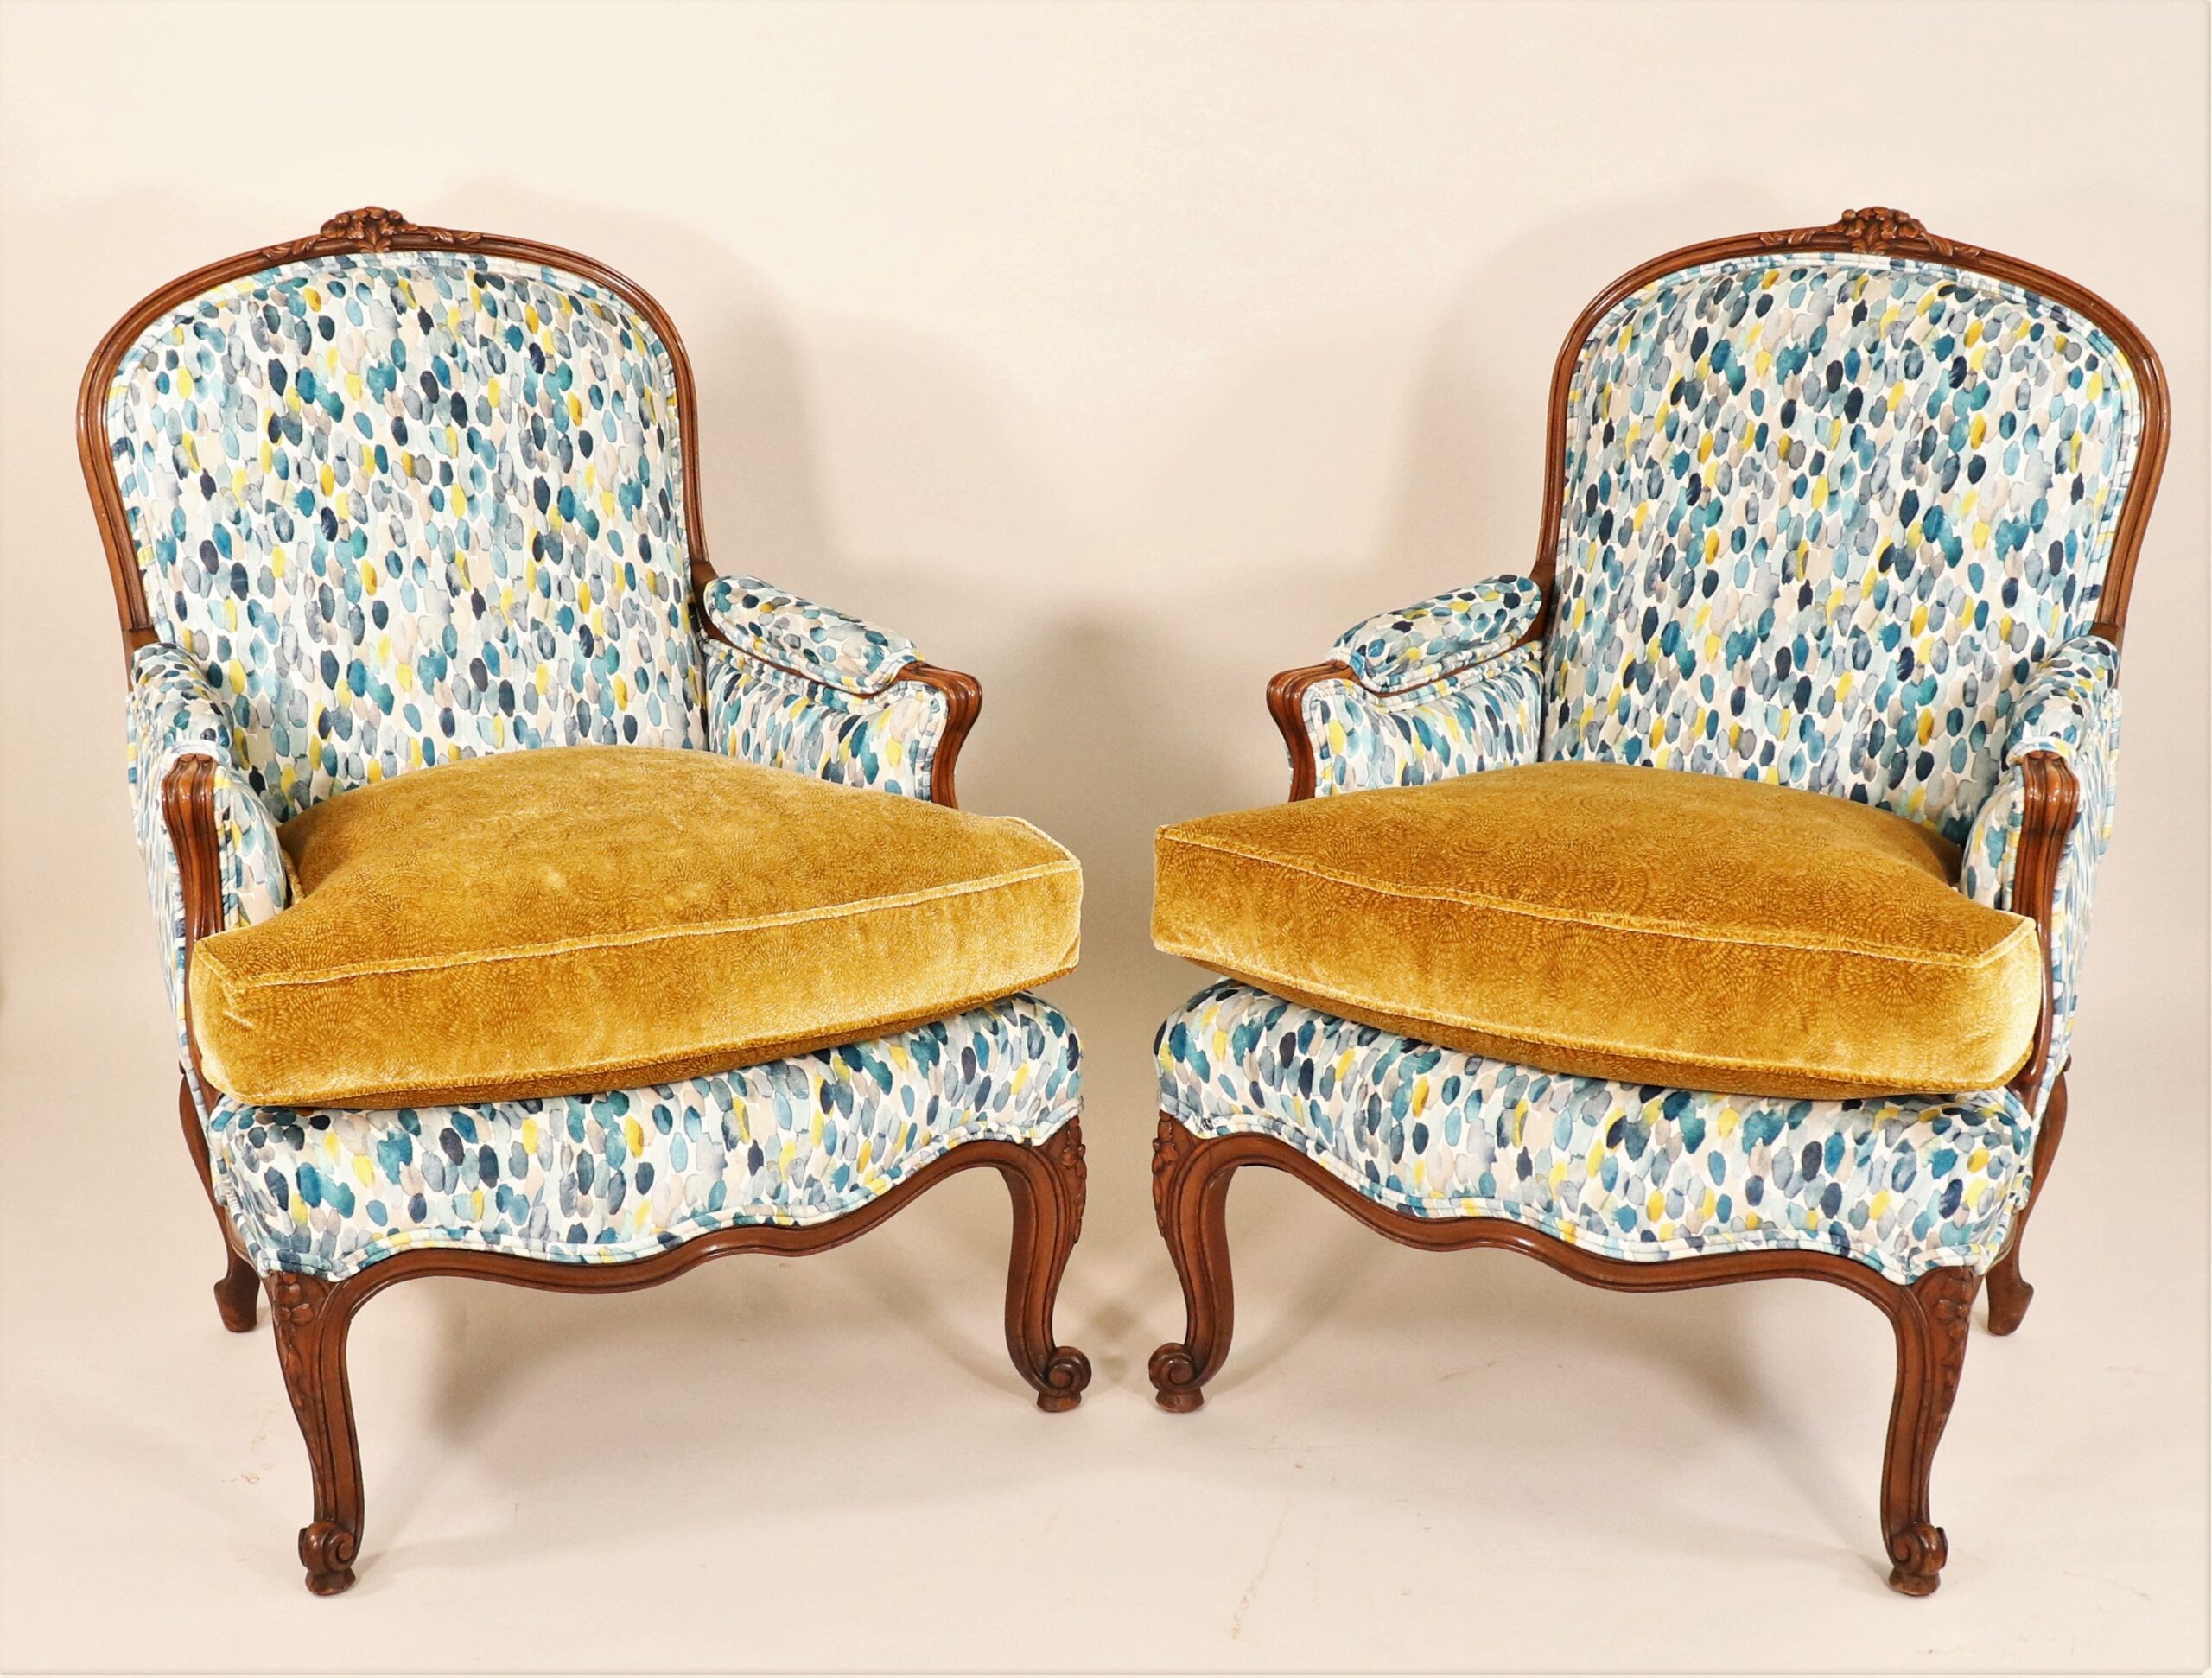 Pair of Mid-19th Century French Louis XV Style Beechwood Bergere Armchairs